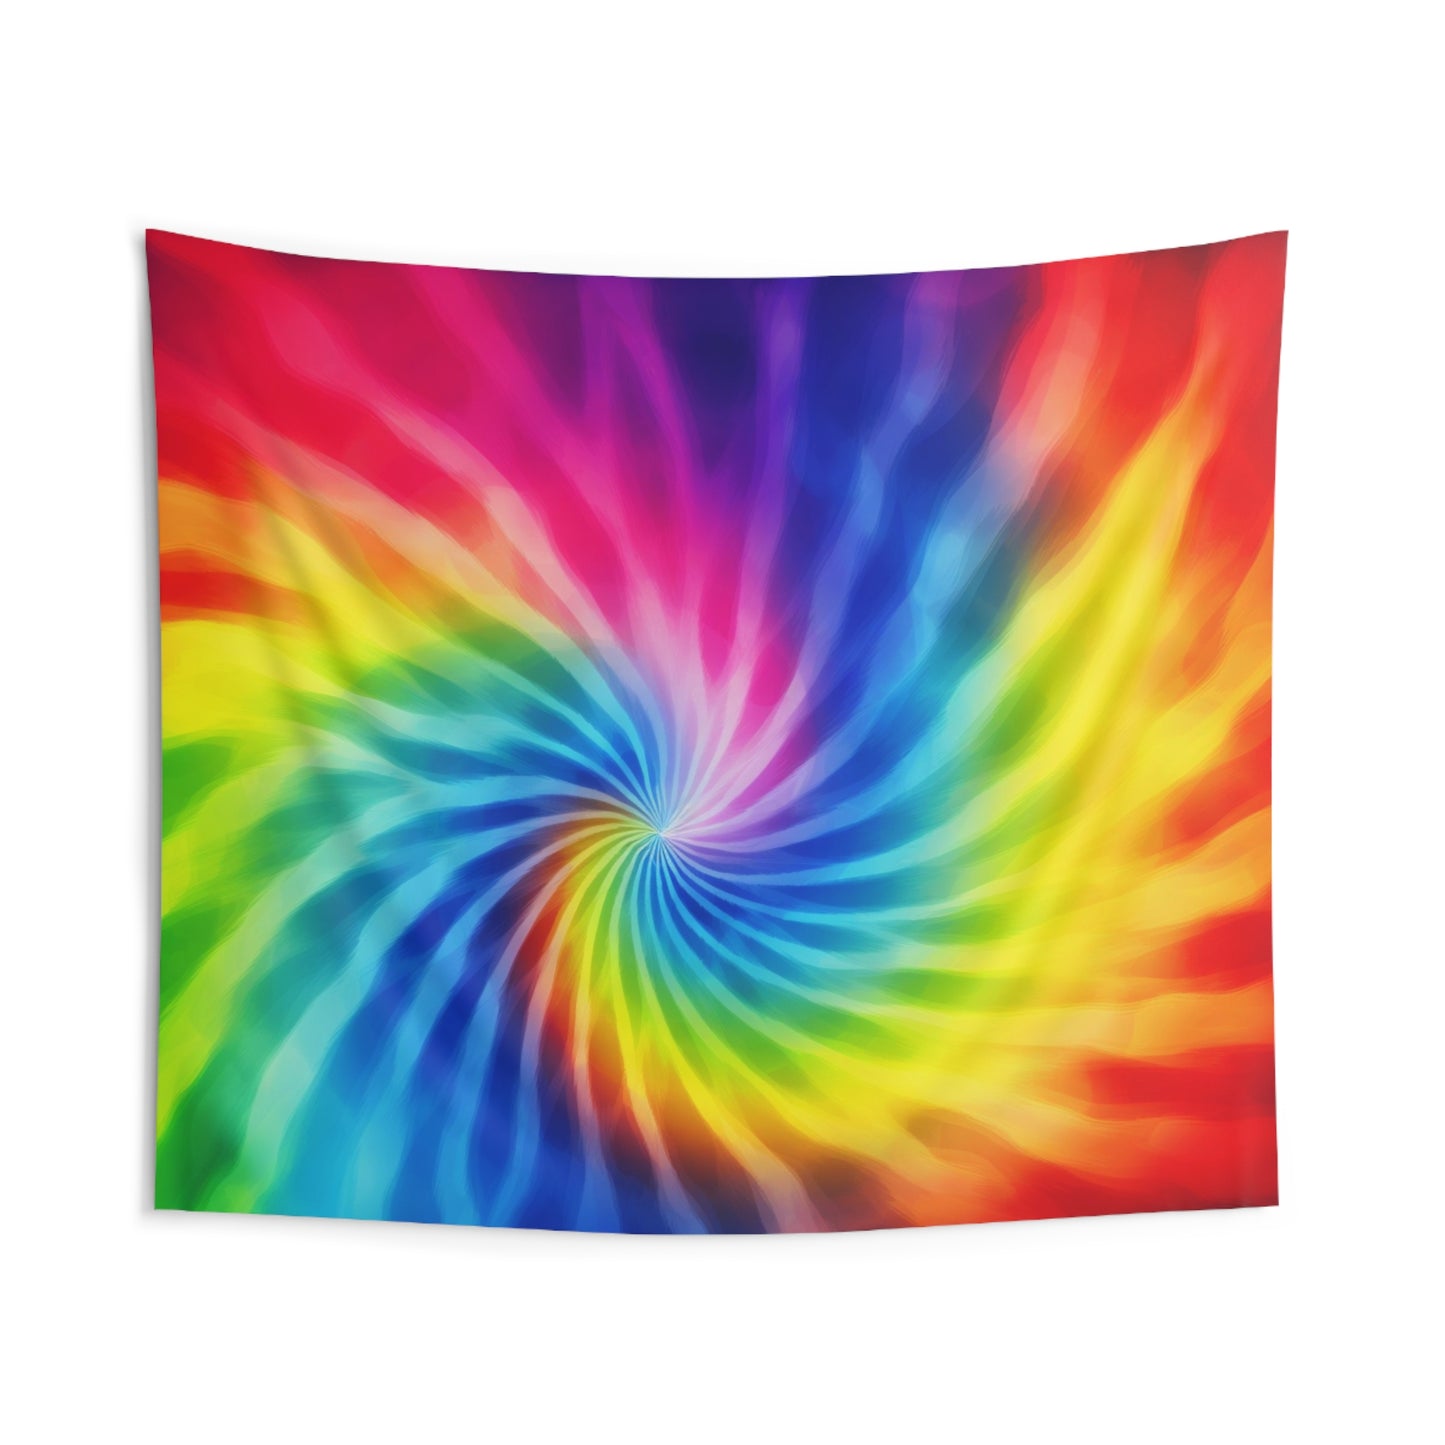 Rainbow Tie Dye Tapestry, Wall Art Hanging Landscape Indoor Aesthetic Large Small Decor Bedroom College Dorm Room Starcove Fashion